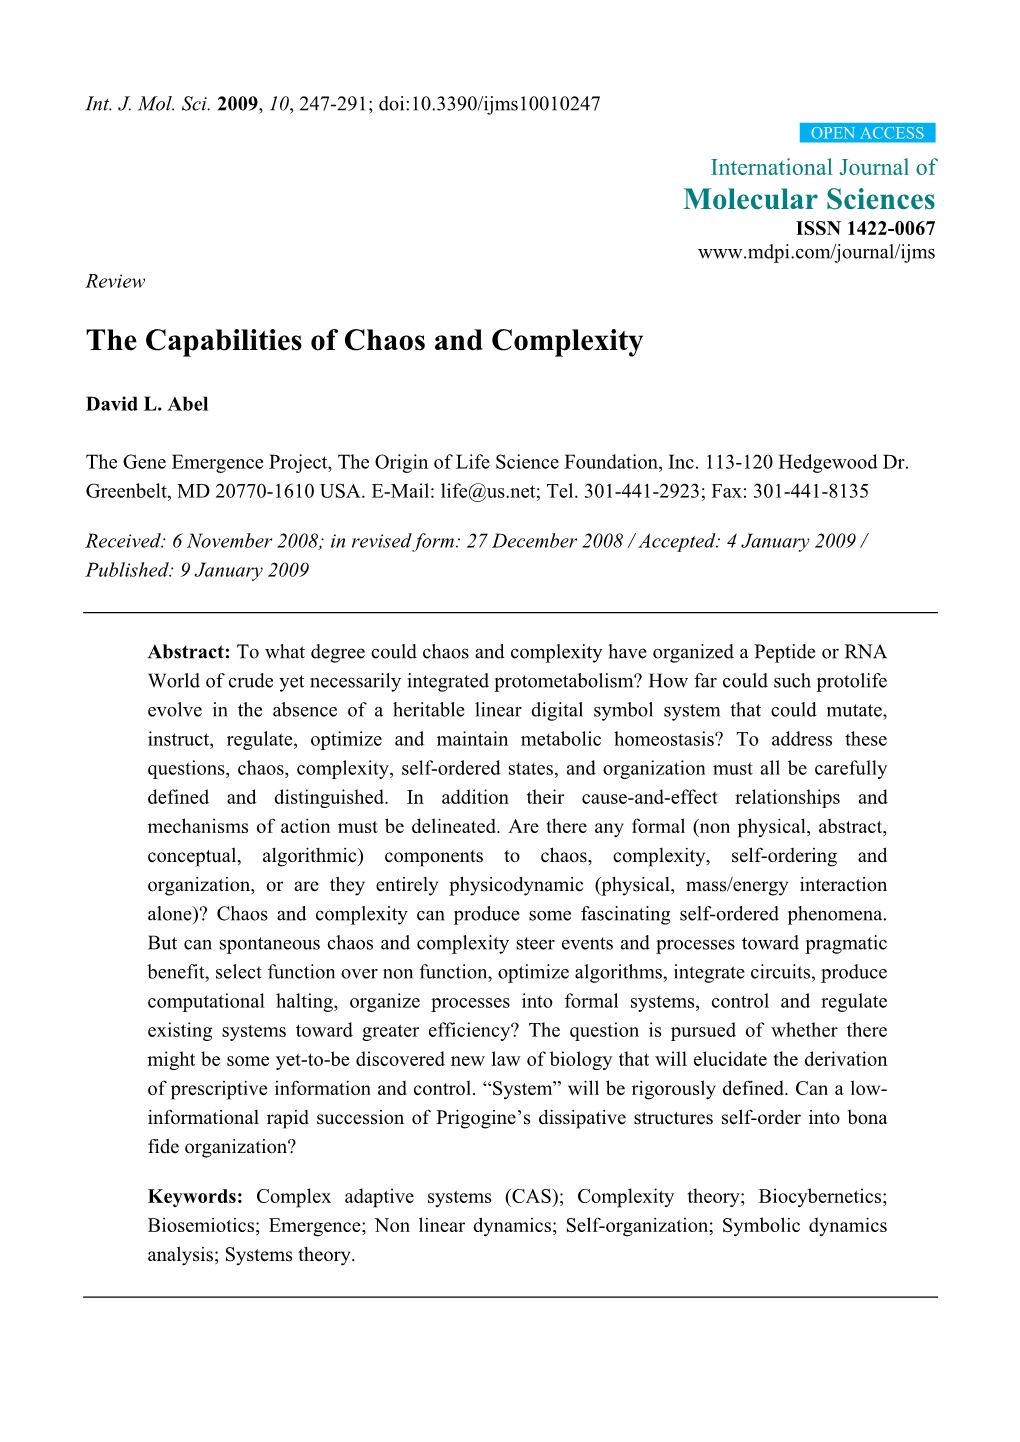 The Capabilities of Chaos and Complexity